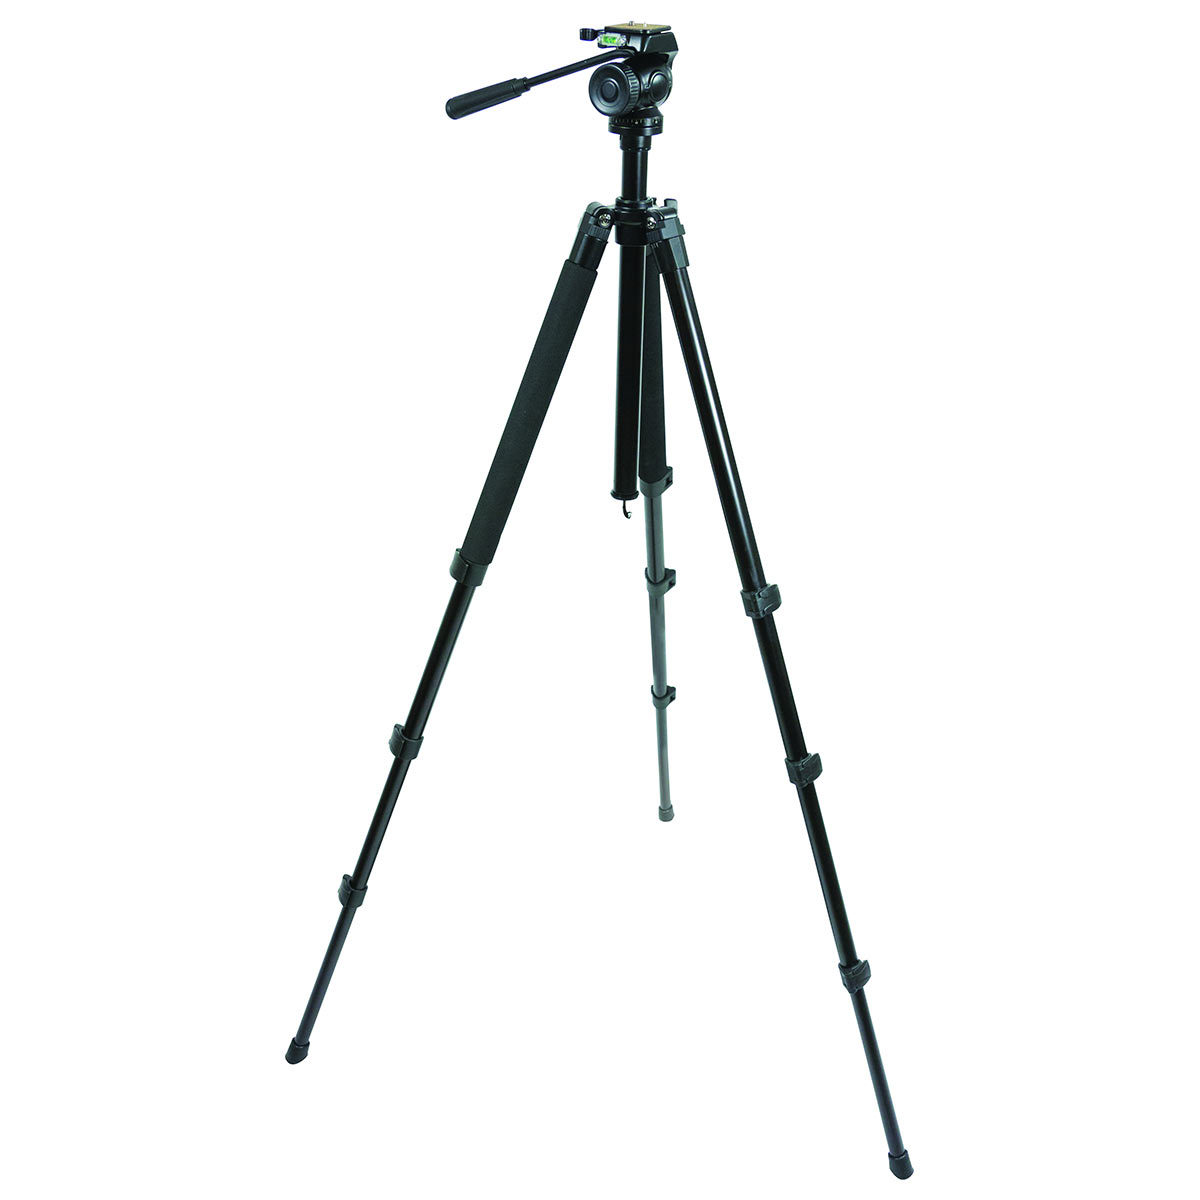 The Celestron Trailseeker Spotting scope with cover